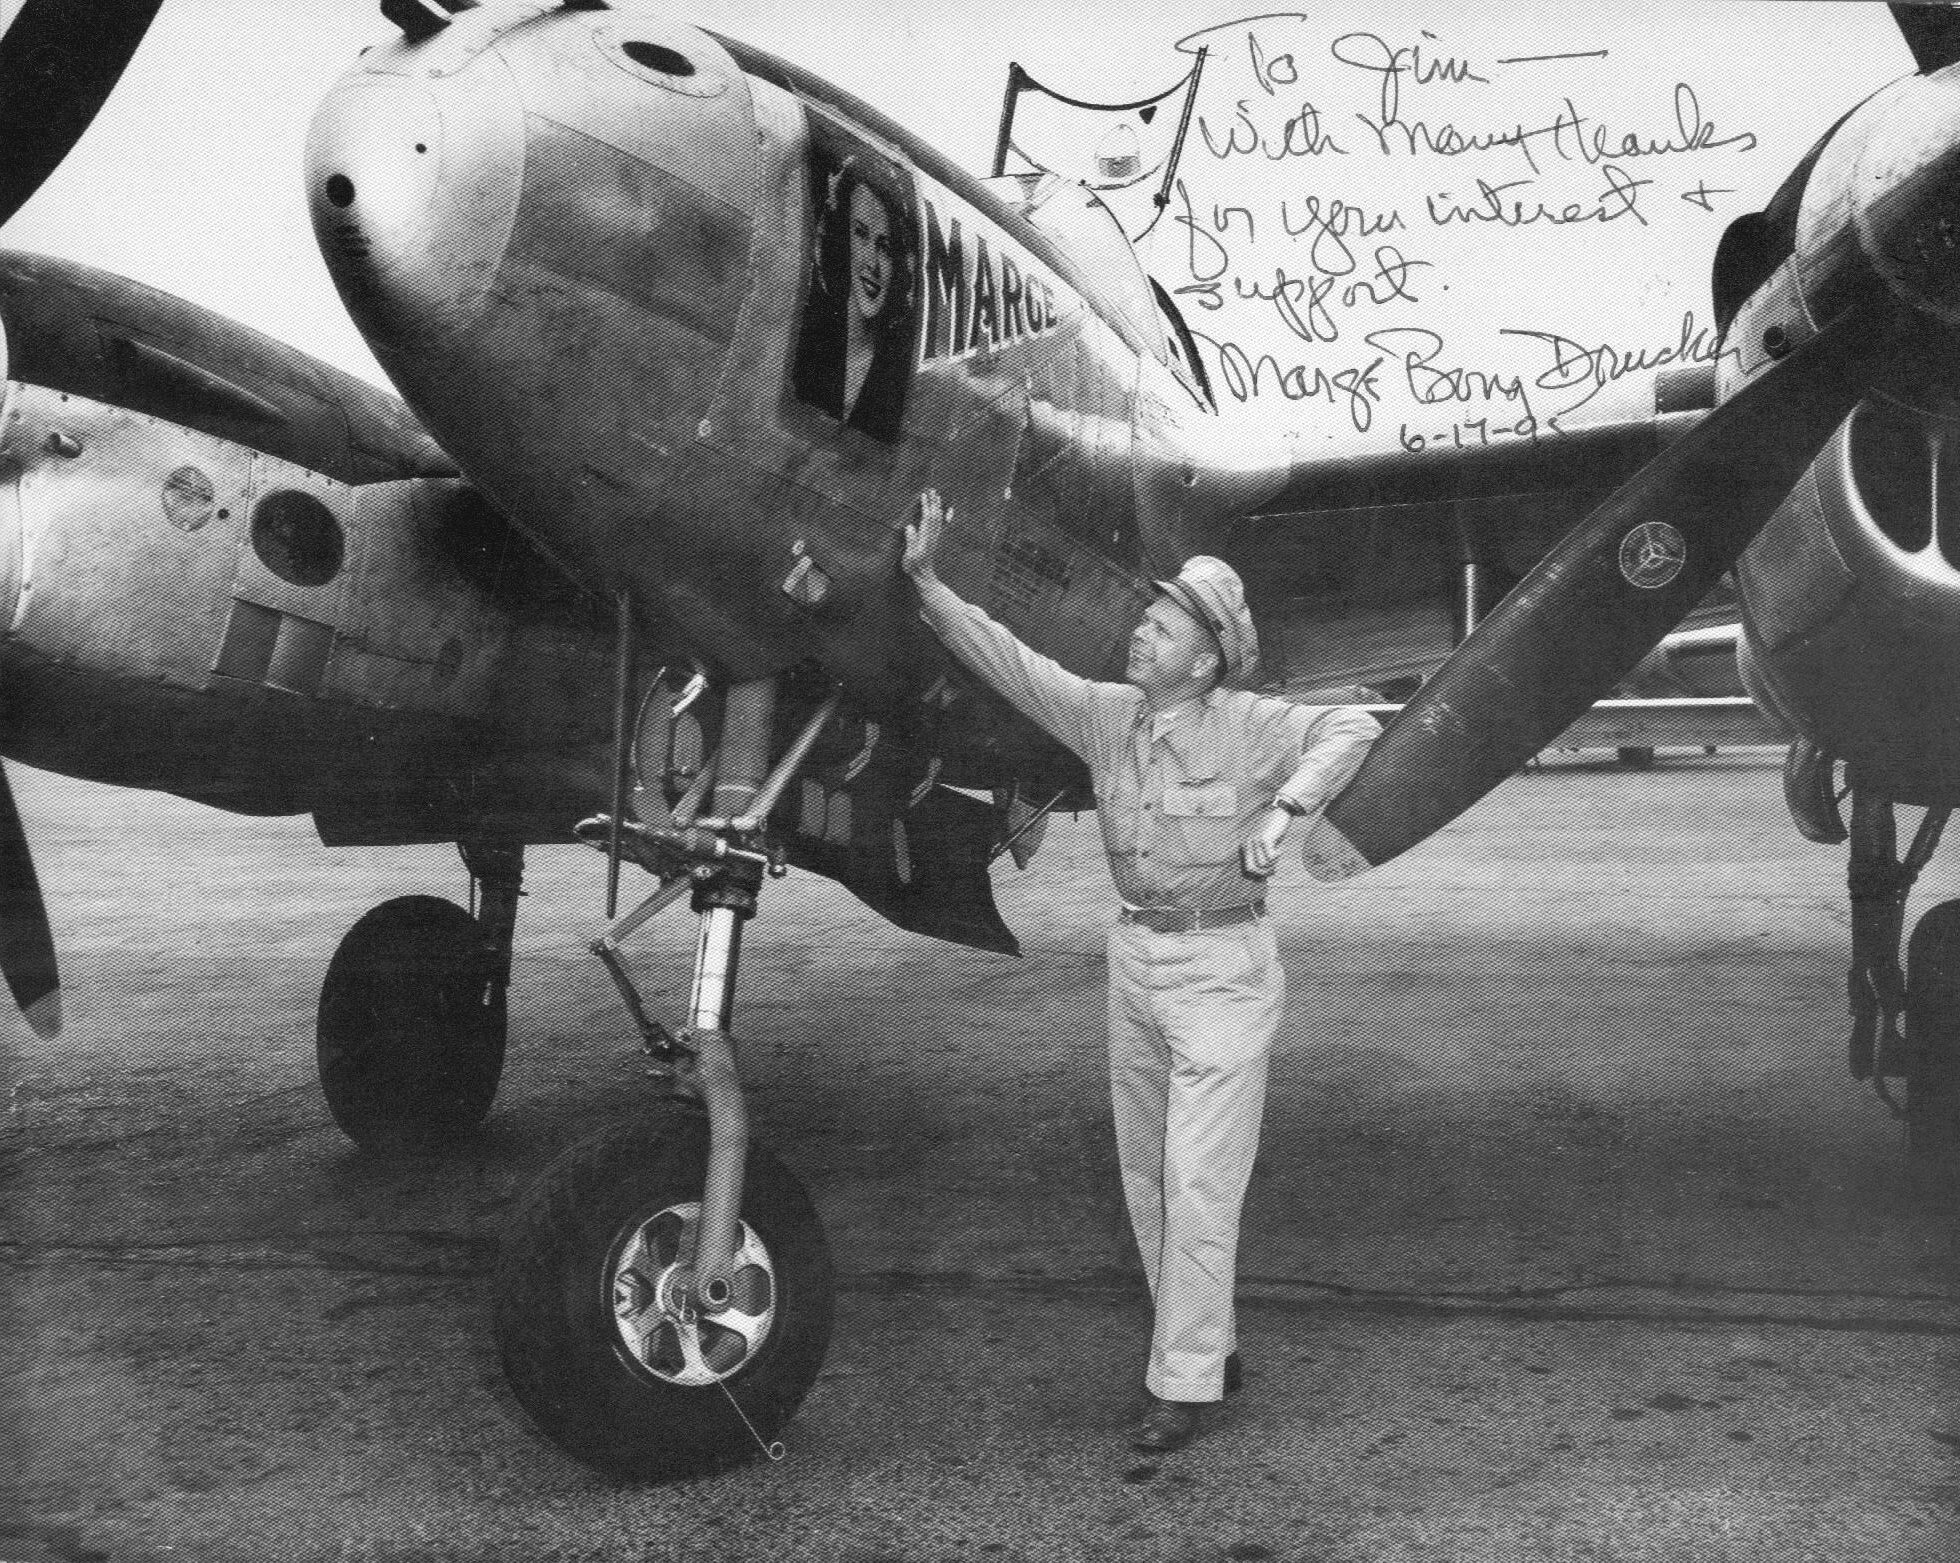 USAAF Major Richard Bong with his P-38 Lightning aircraft 'Marge', date unknown